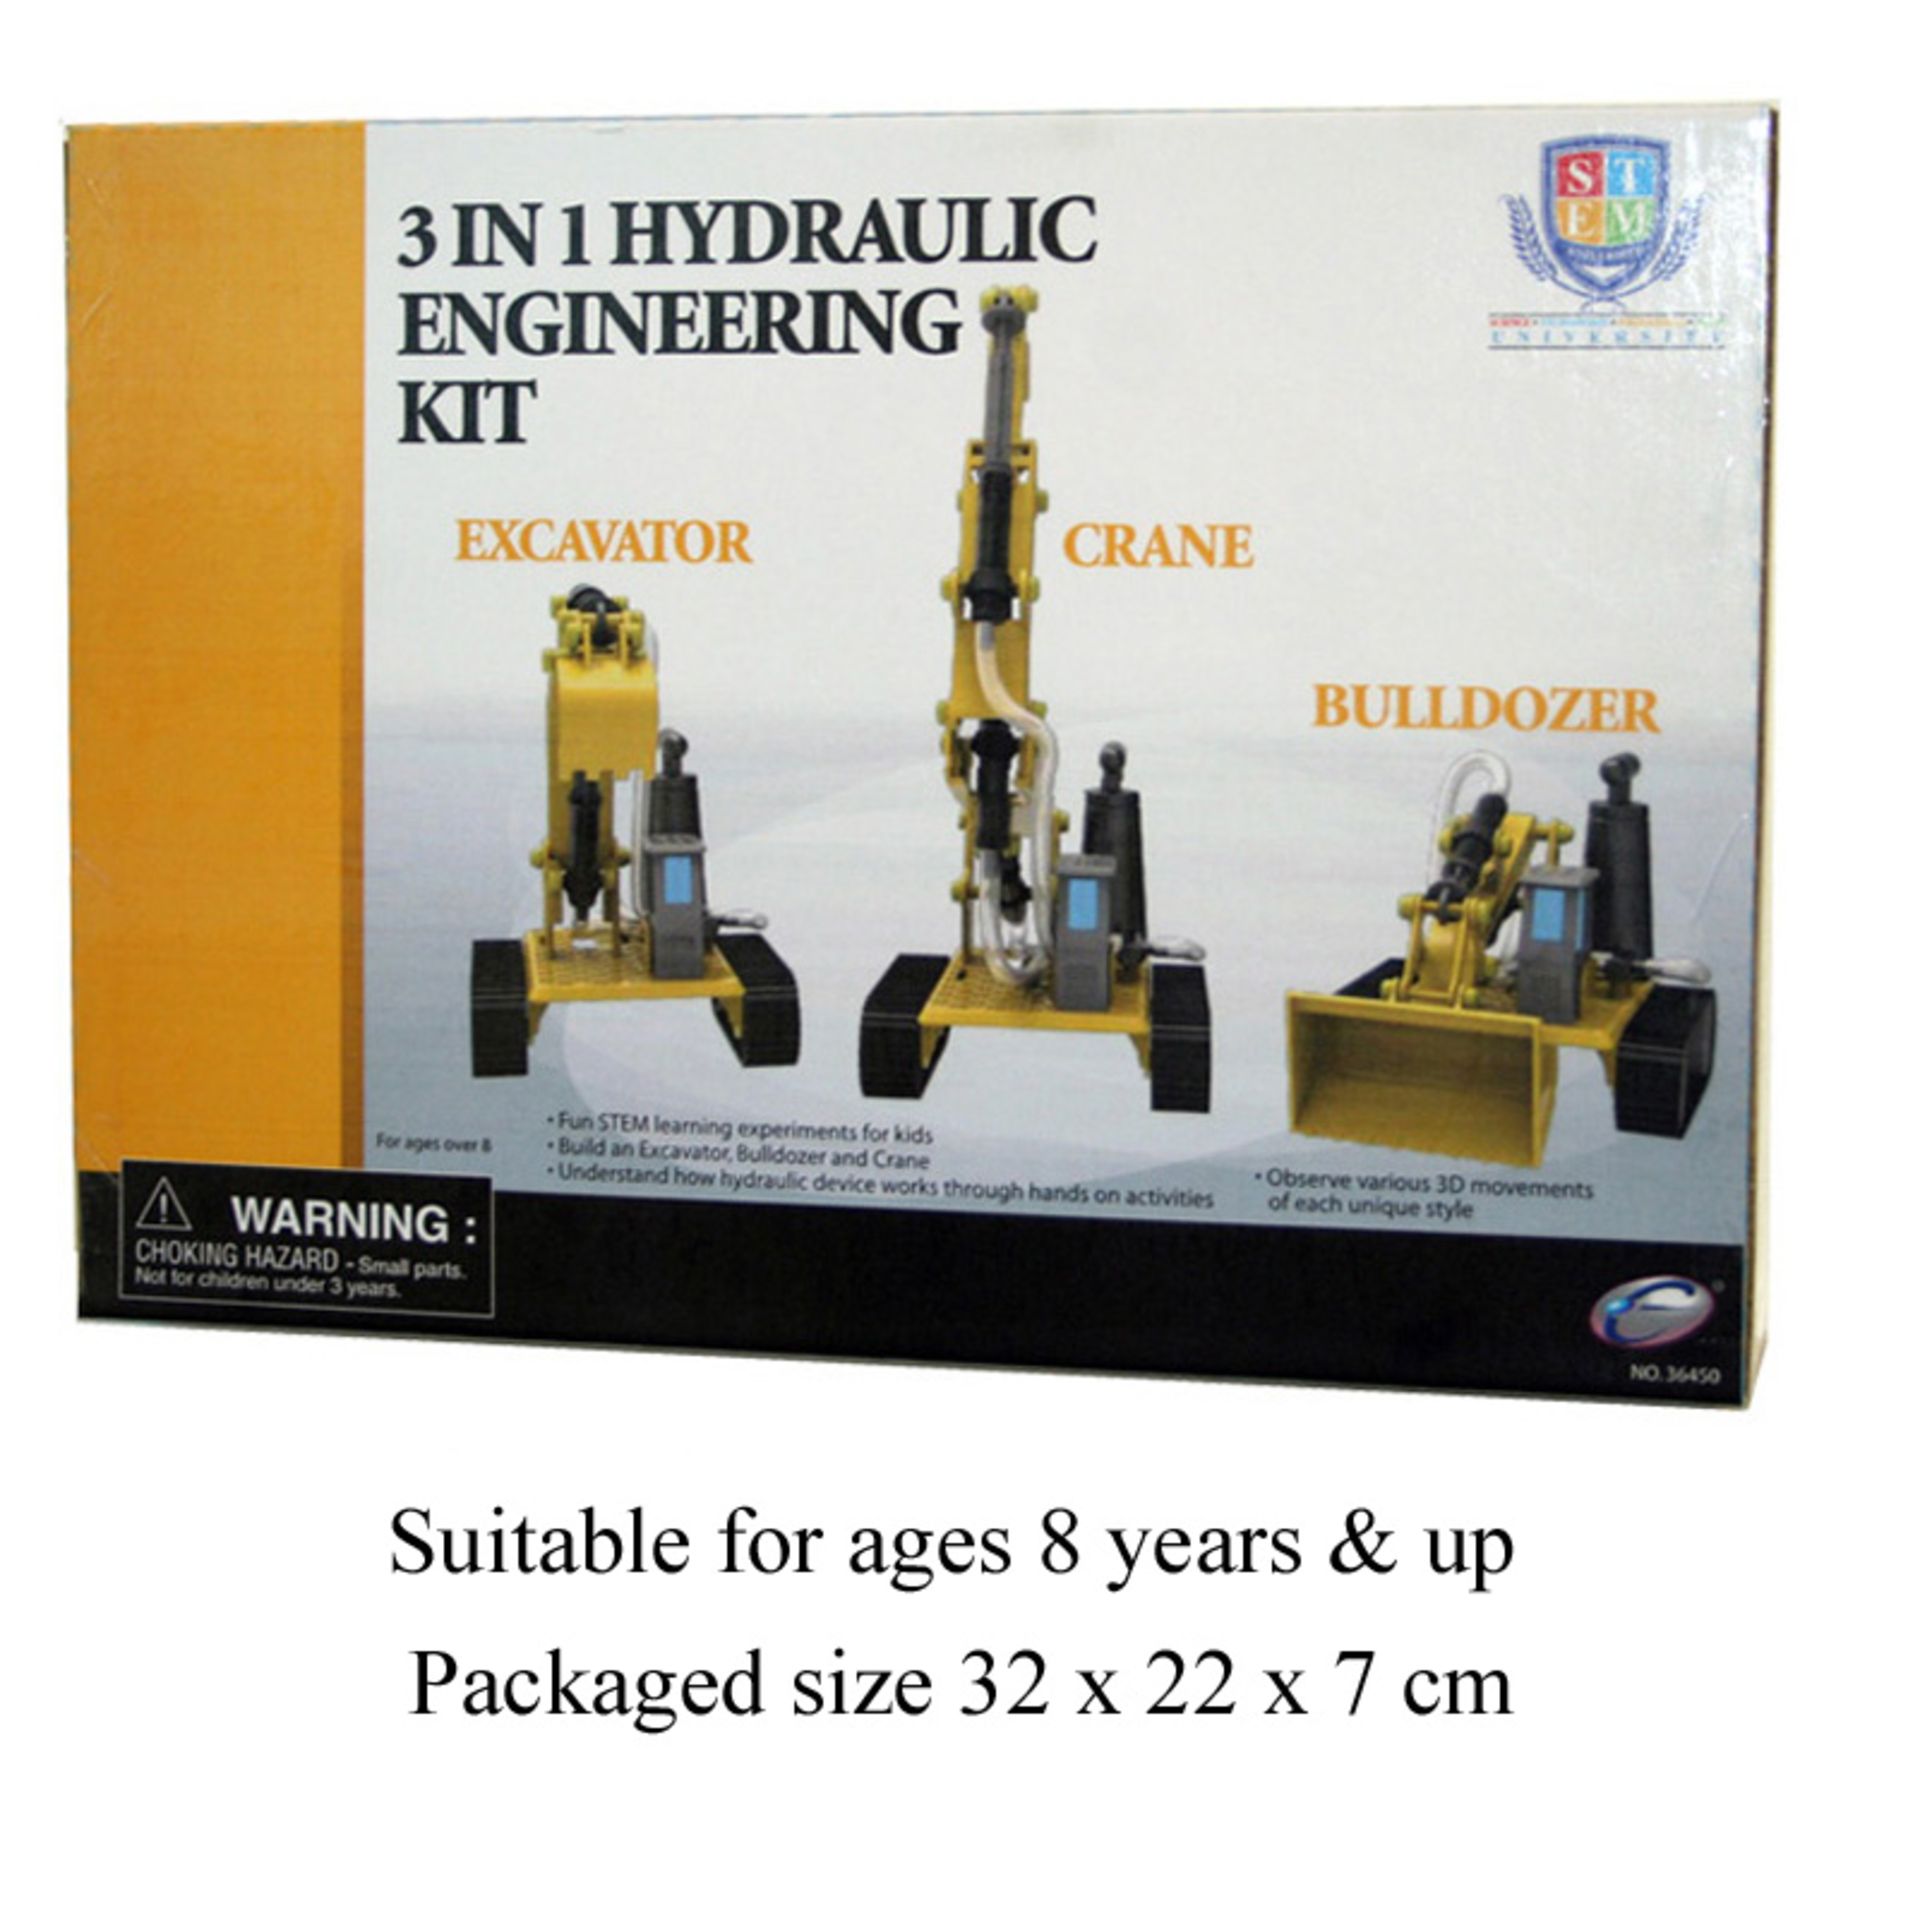 V Brand New Hydraulic Engineering 3 in 1 Construction Kit - Makes Three Different Vehicles - ISP £